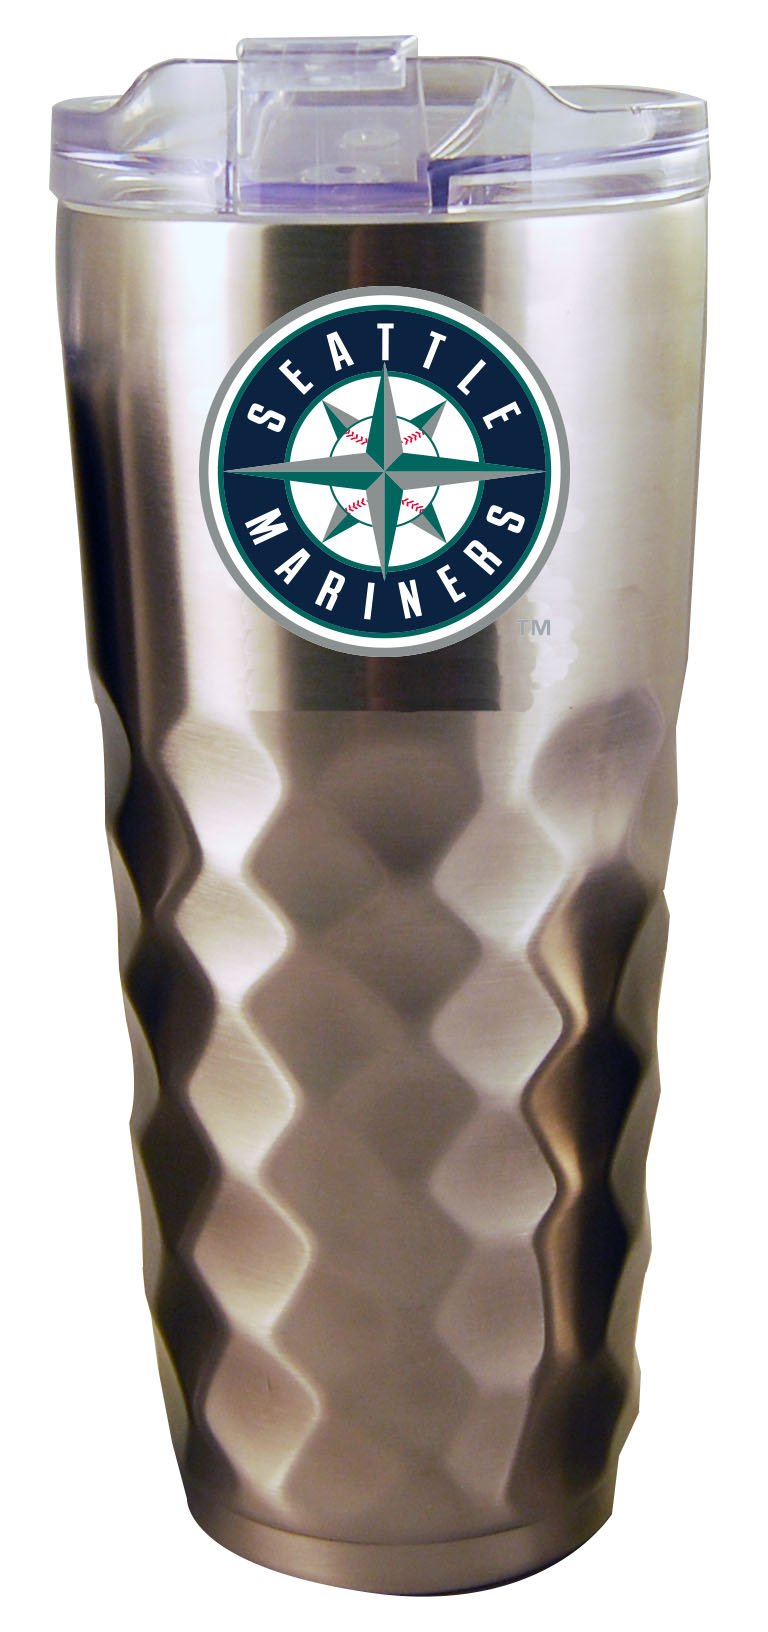 32oz Stainless Steel Diamond Tumbler | Seattle Mariners
CurrentProduct, Drinkware_category_All, MLB, Seattle Mariners, SMA
The Memory Company